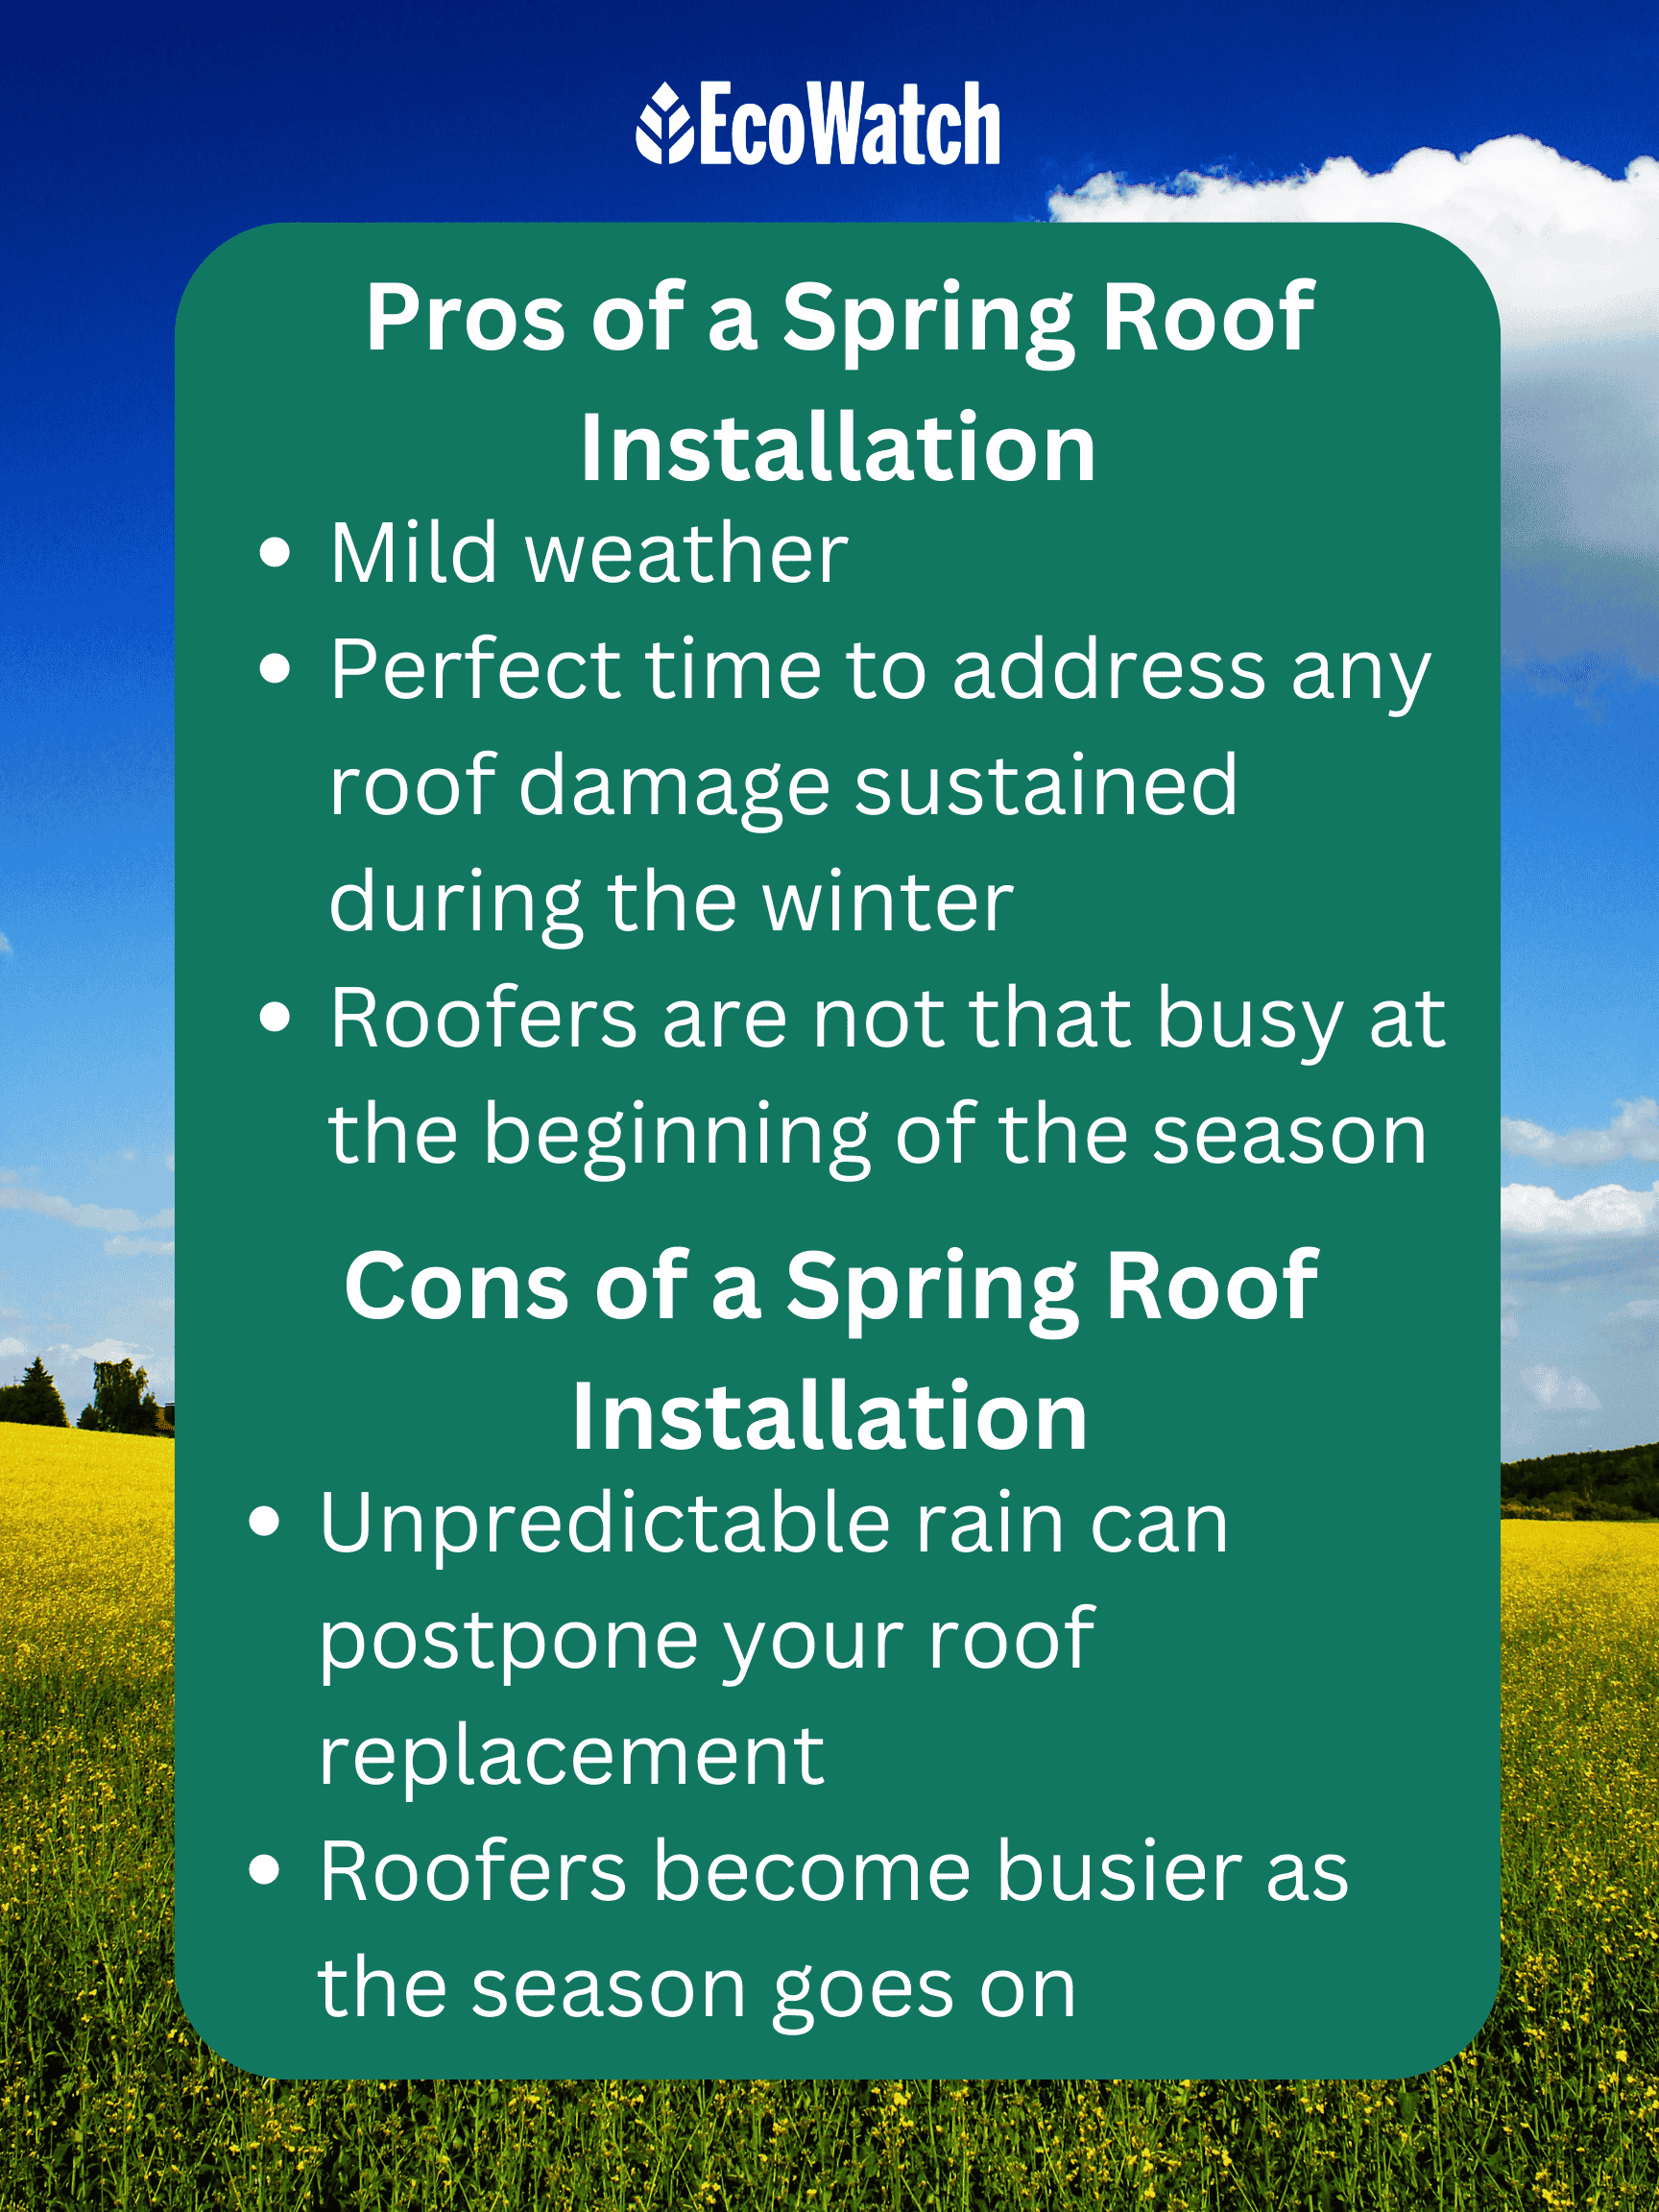 Pros and cons of a spring roof installation